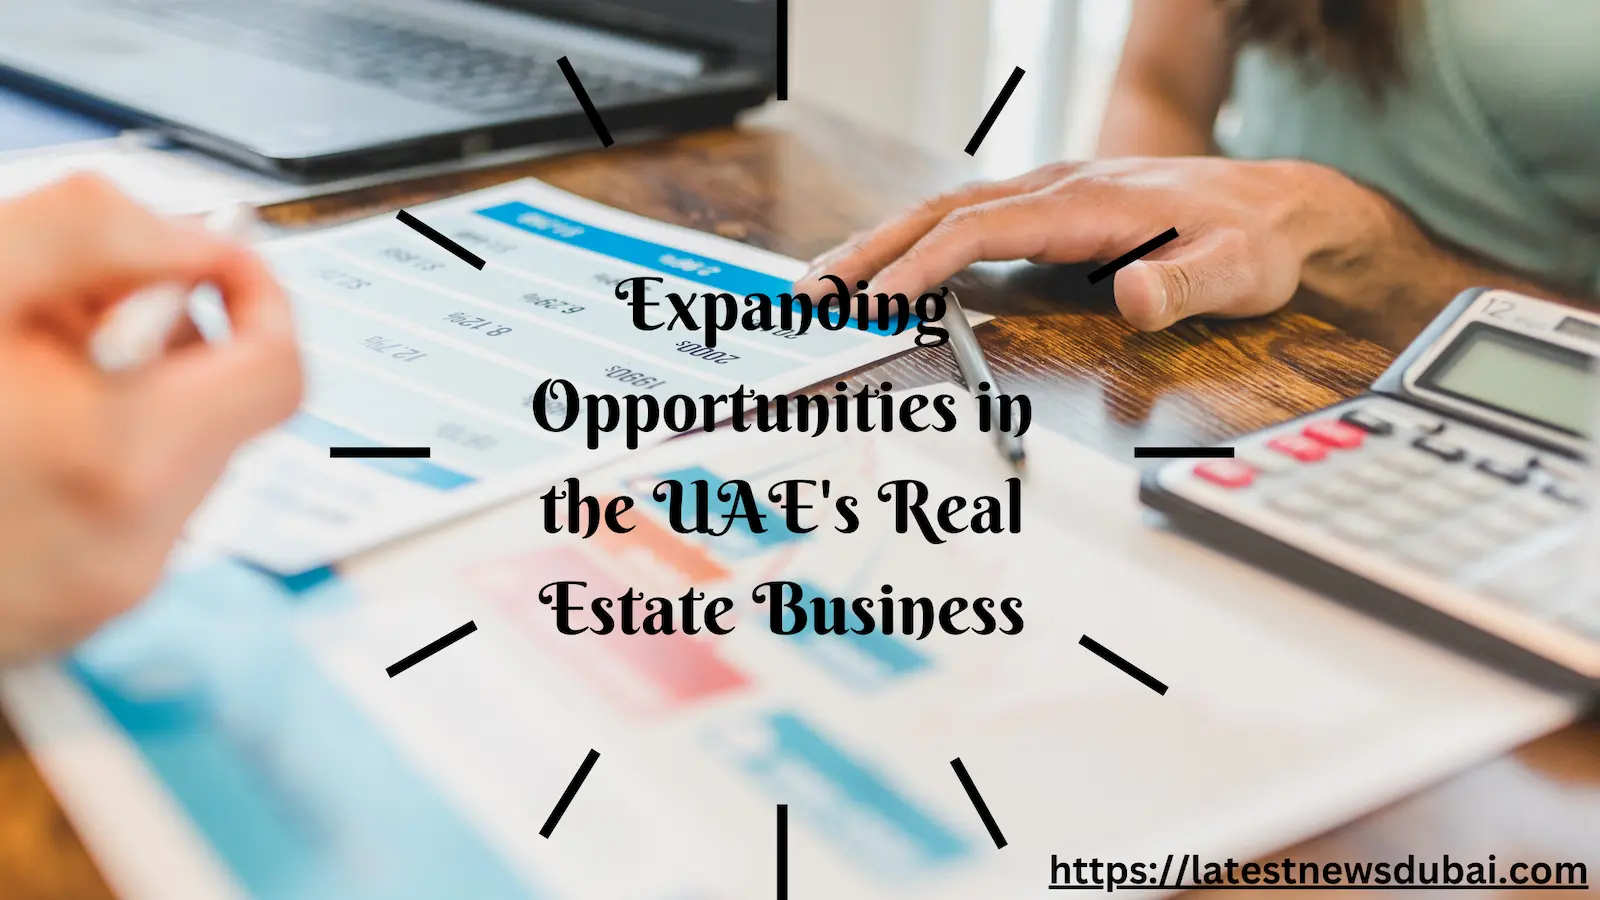 Expanding Opportunities in the UAE's Real Estate Business